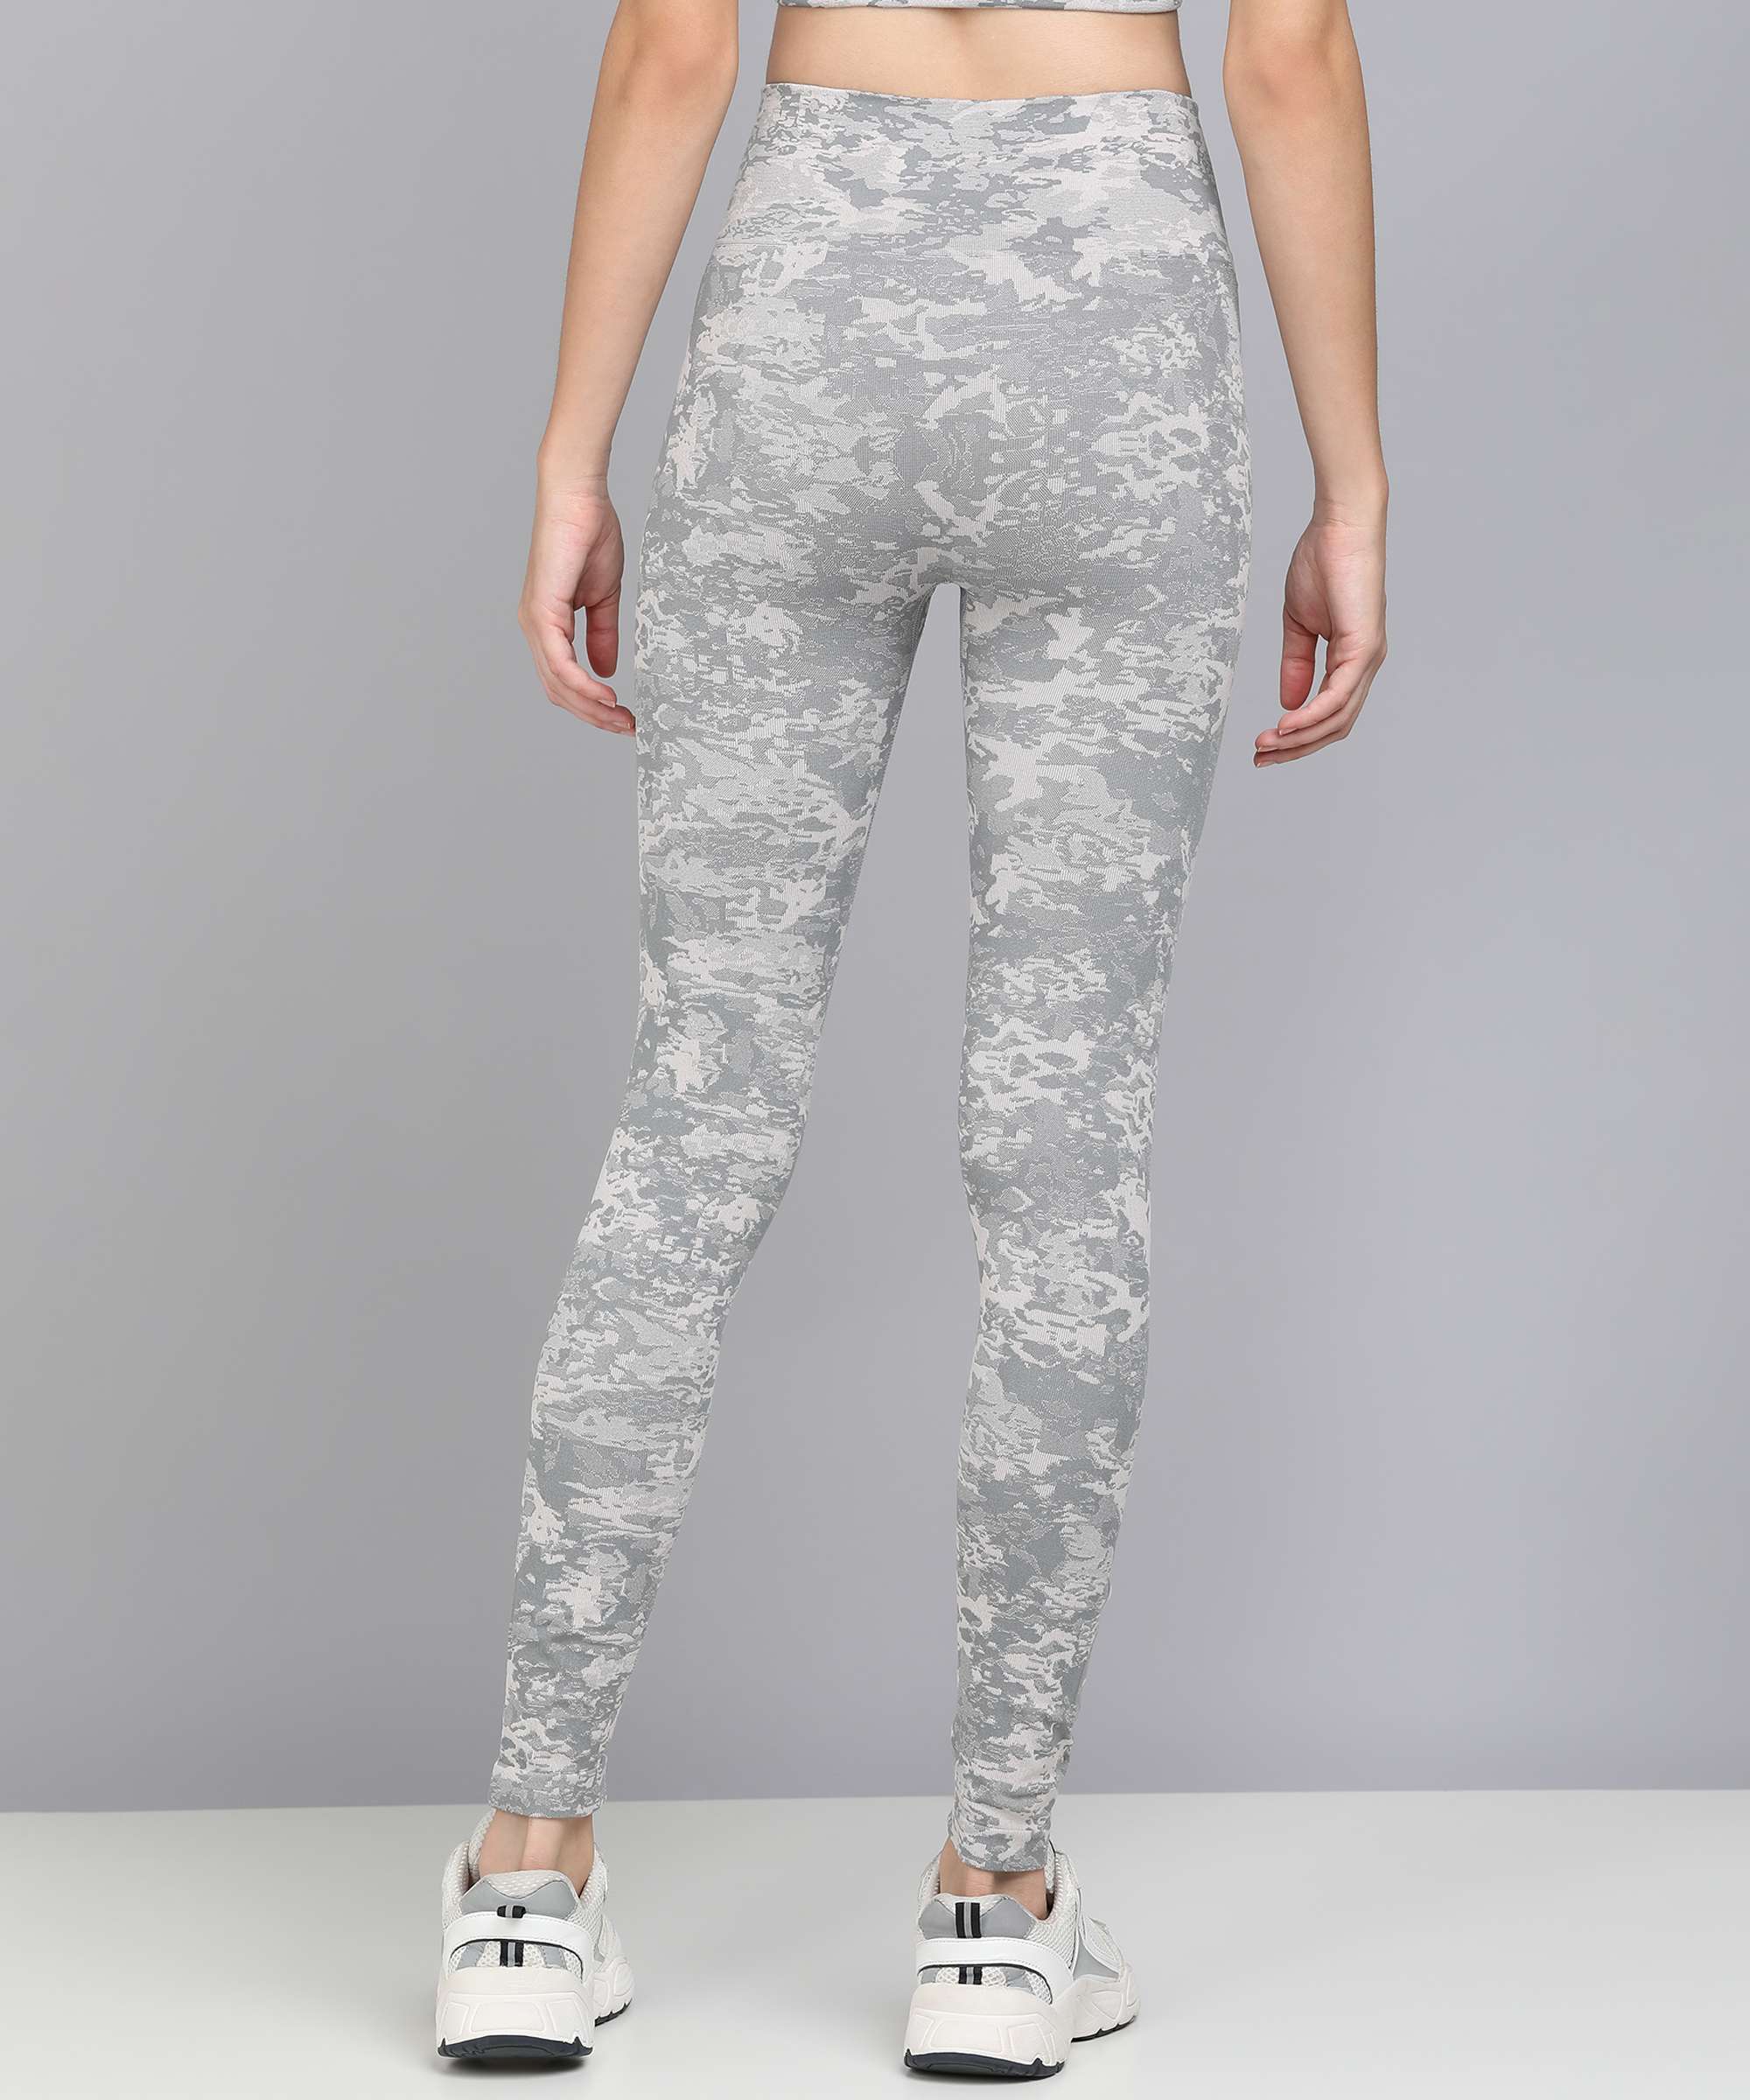 Seamless Camo Leggings - KOBO SPORTS - Exclusively Designed for